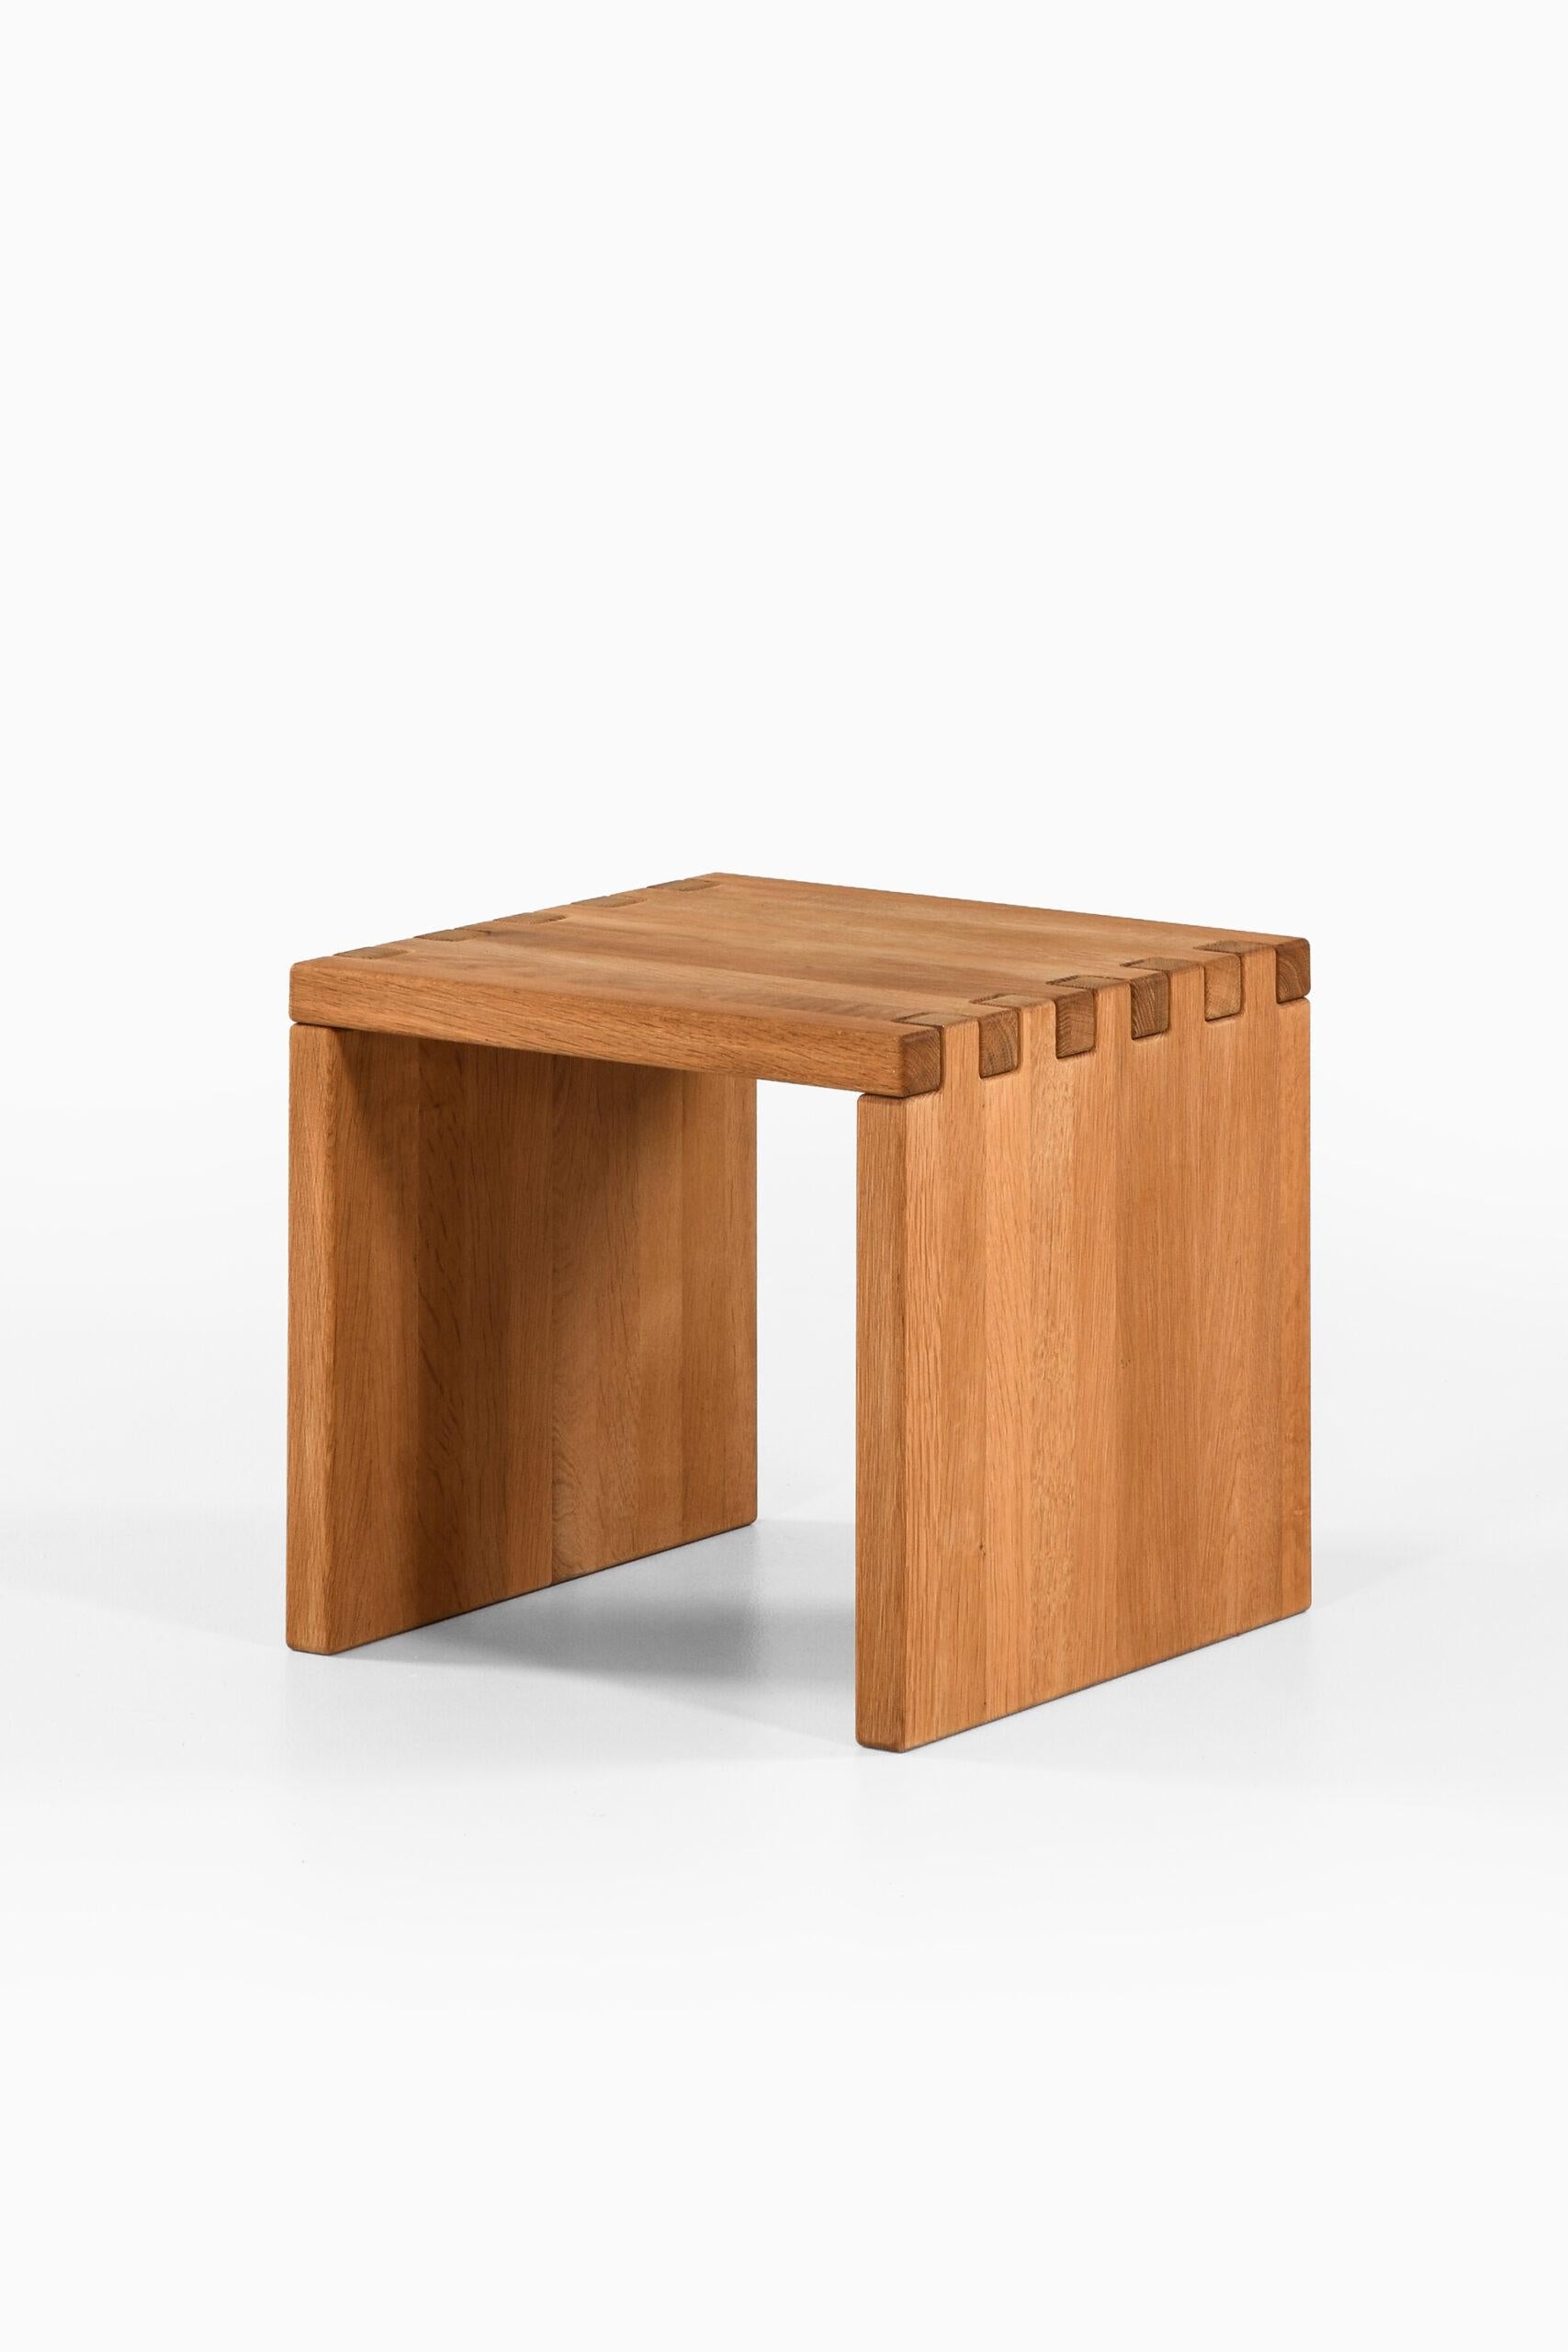 Side table / stool by unknown designer.